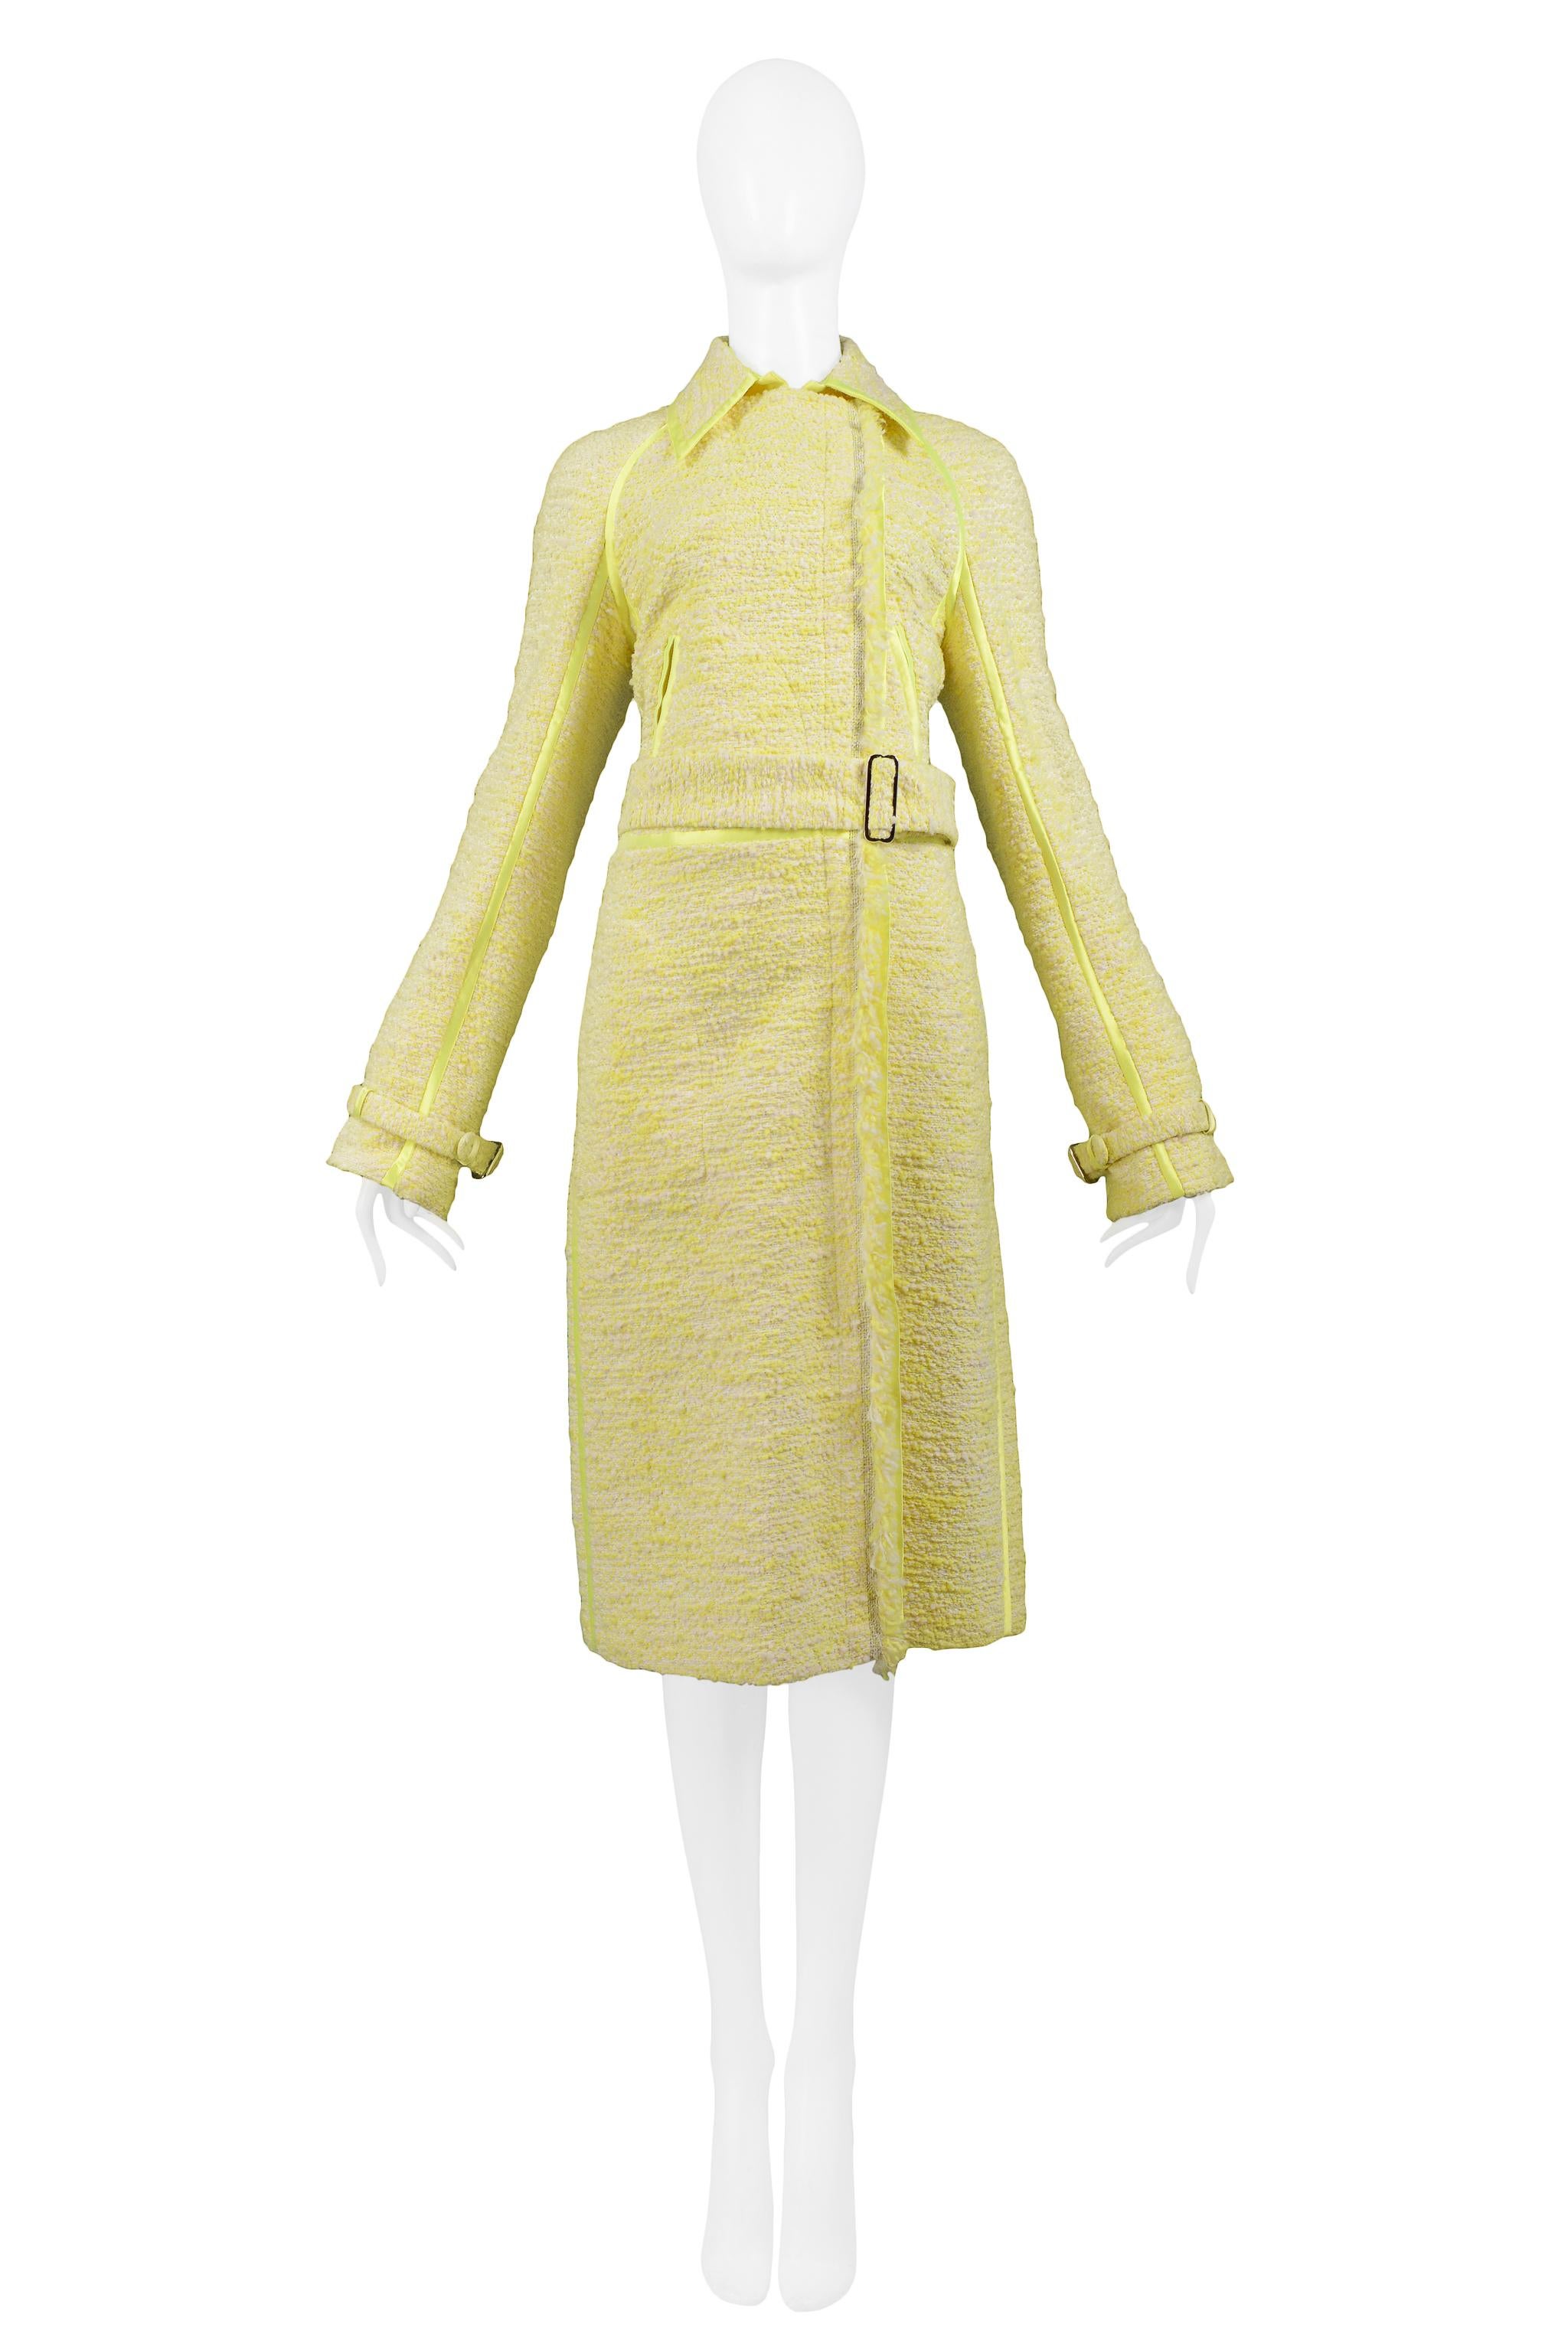 Resurrection Vintage is excited to offer a vintage Gianfranco Ferre citron-yellow wool boucle coat featuring an off-center closure, belted waist & cuffs, slit pockets, and exposed trim detailing throughout. 

Gianfranco Ferre
Size 40
Wool &